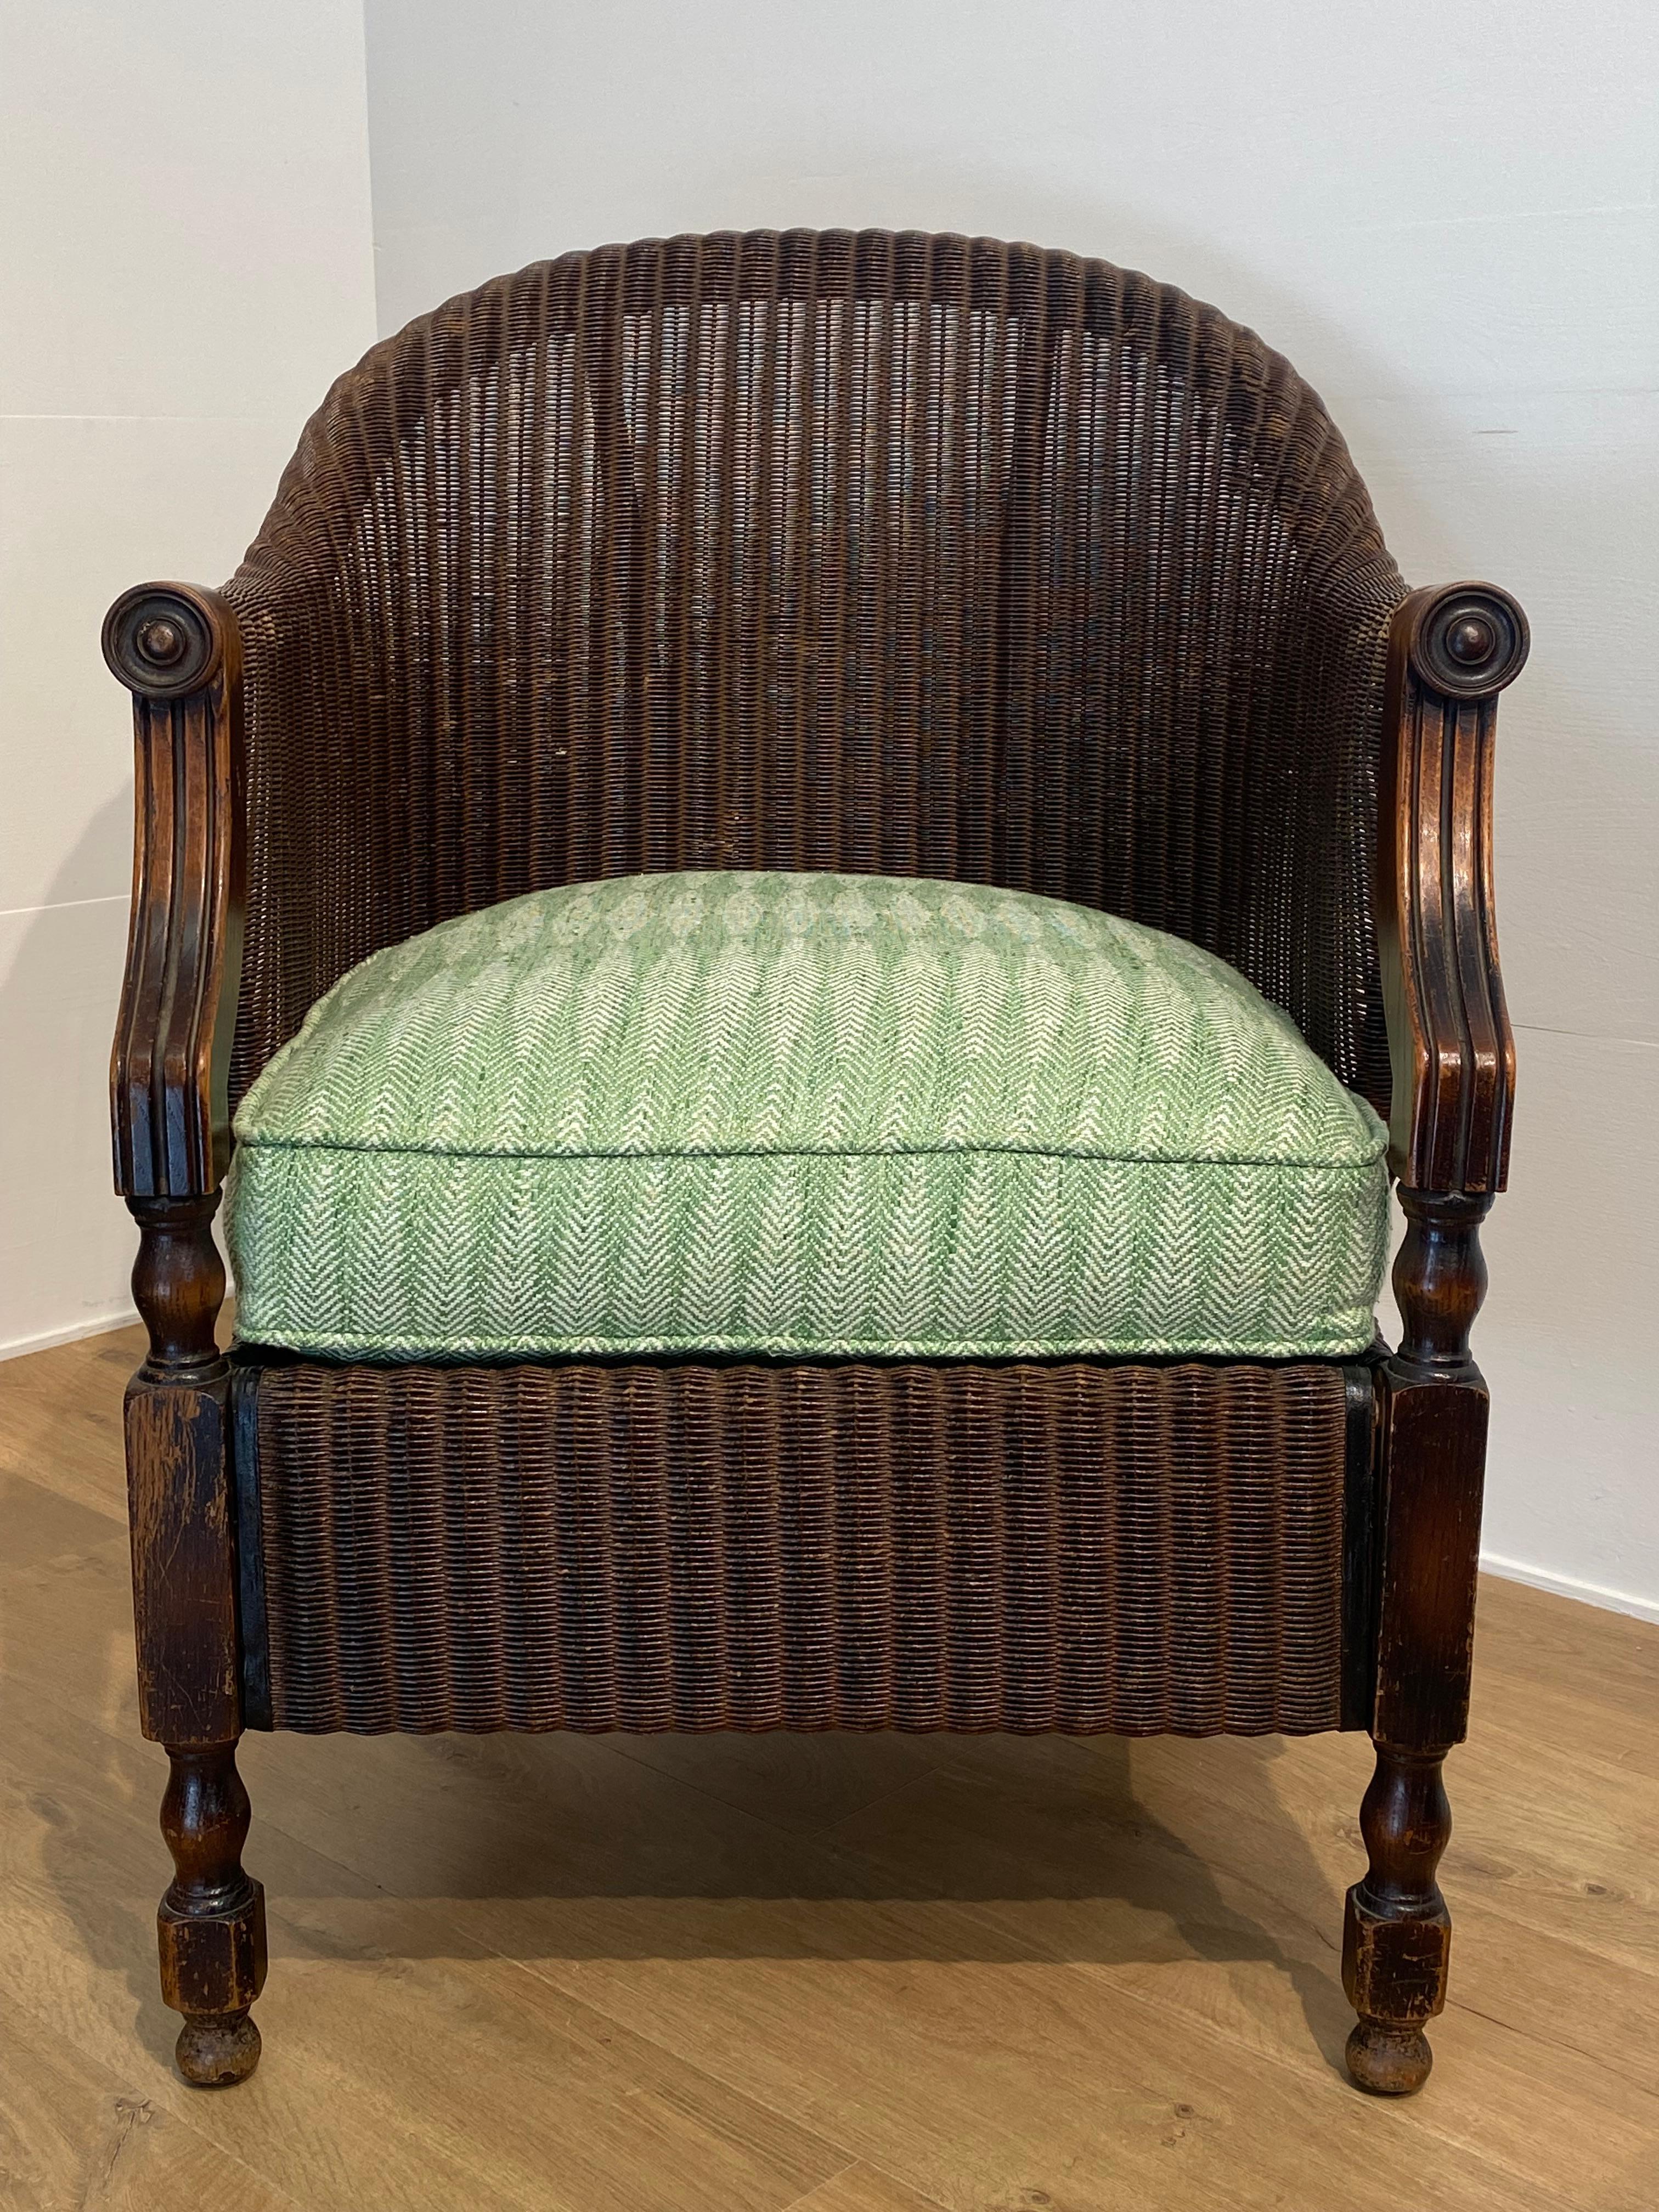 Pair of antique Loyd Loom Chairs In Rattan In Fair Condition For Sale In Schellebelle, BE